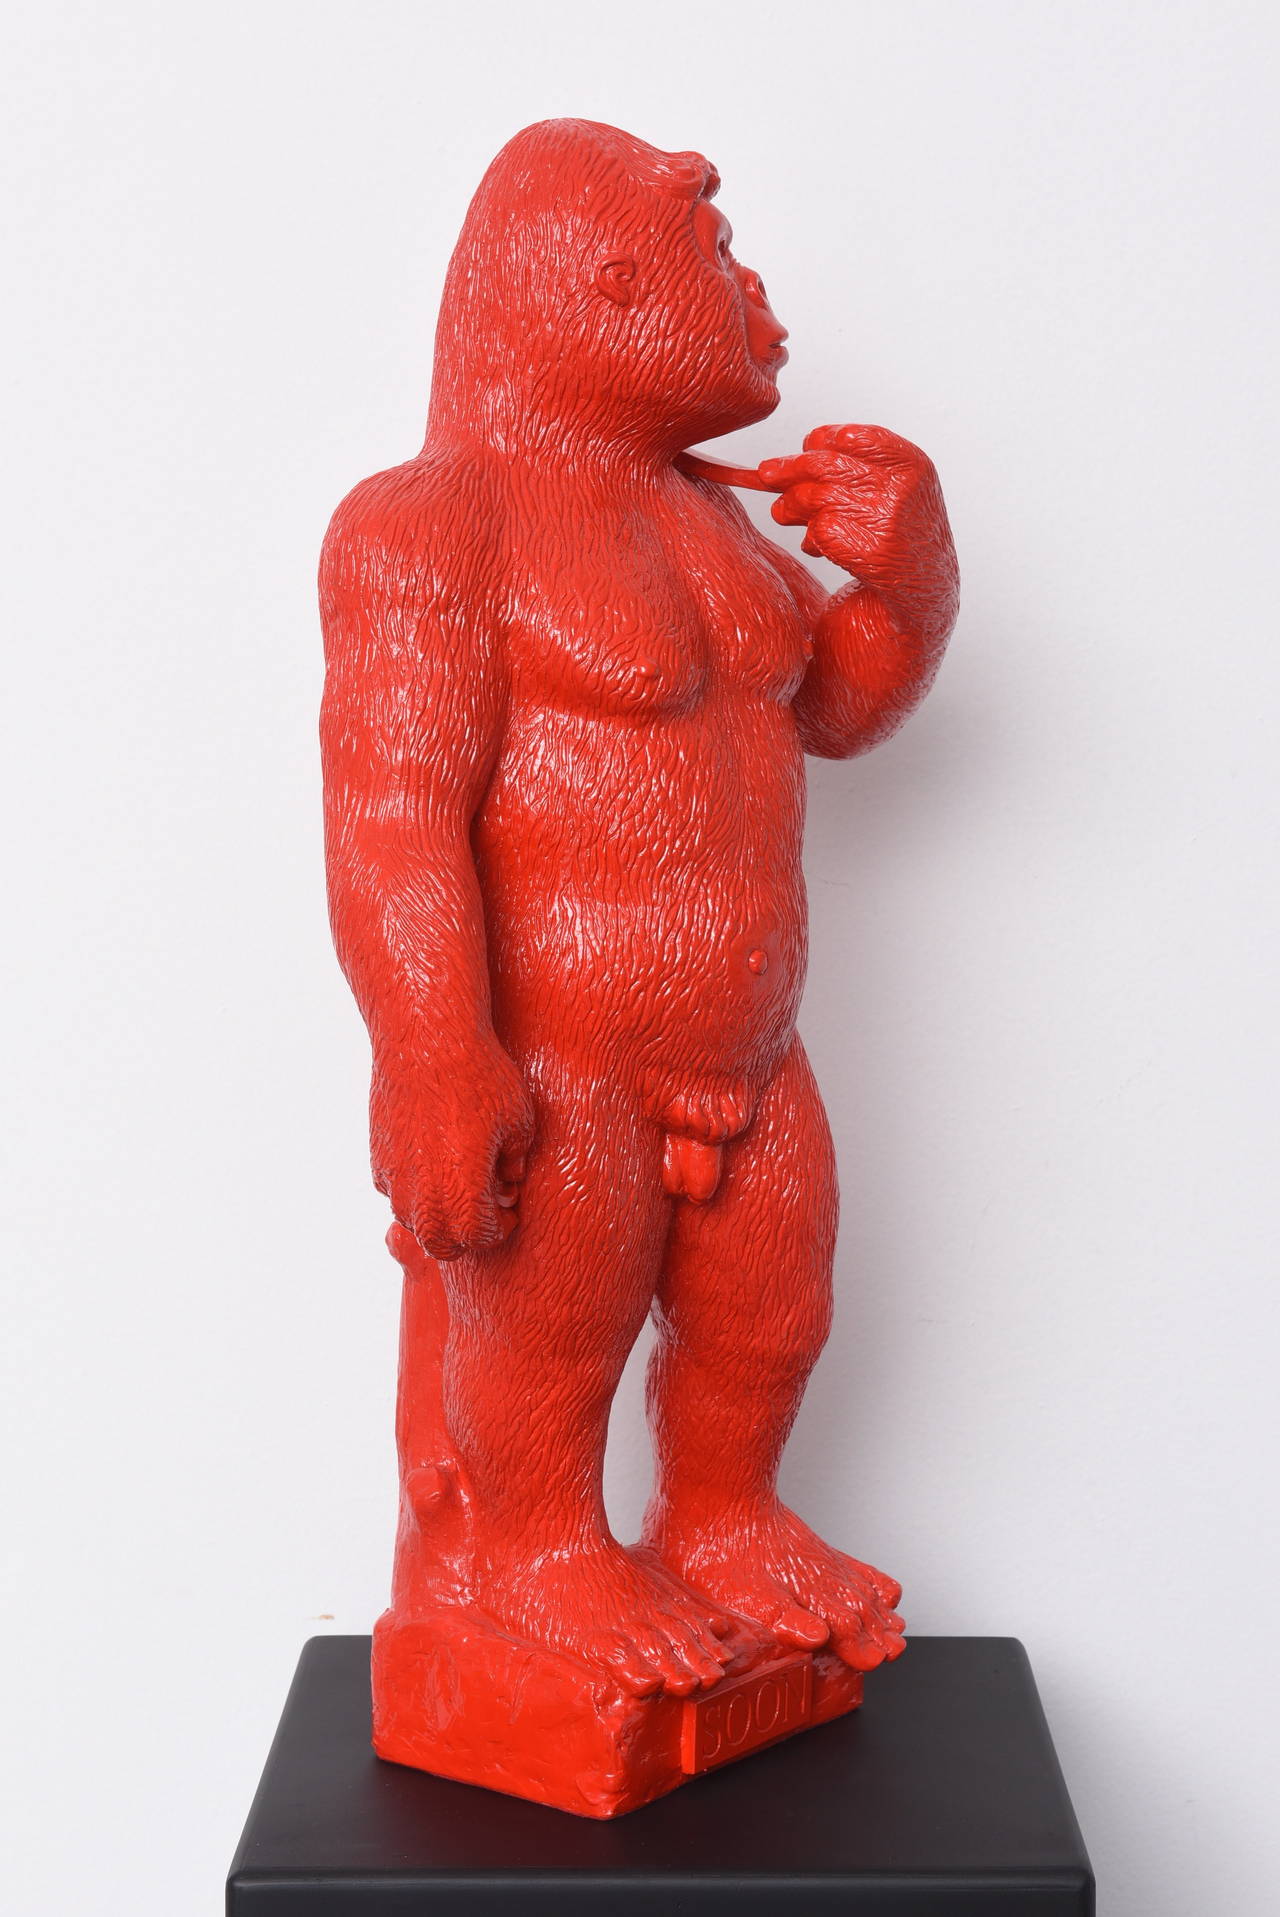 Soon is a resin sculpture made by Patrick Schumacher, a French contemporary artist. This sculpture represents a gorilla in the posture of the "David" Renaissance sculpture by Michelangelo. 
"Through my artistic work, I try to